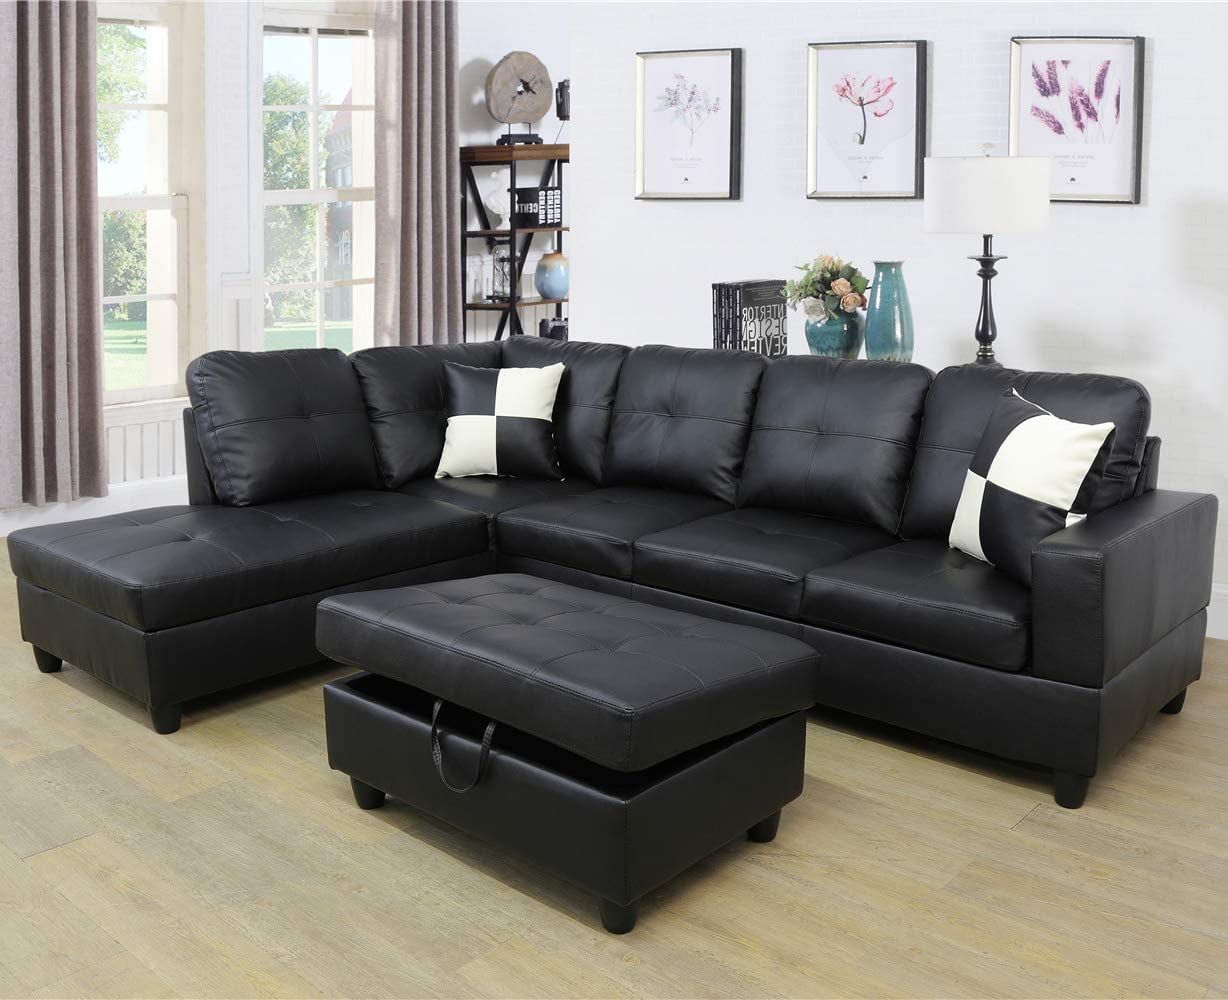 Ainehome Faux Leather Sectional Set, Living Room L Shaped Modern Sofa For Faux Leather Sectional Sofa Sets (Gallery 8 of 21)